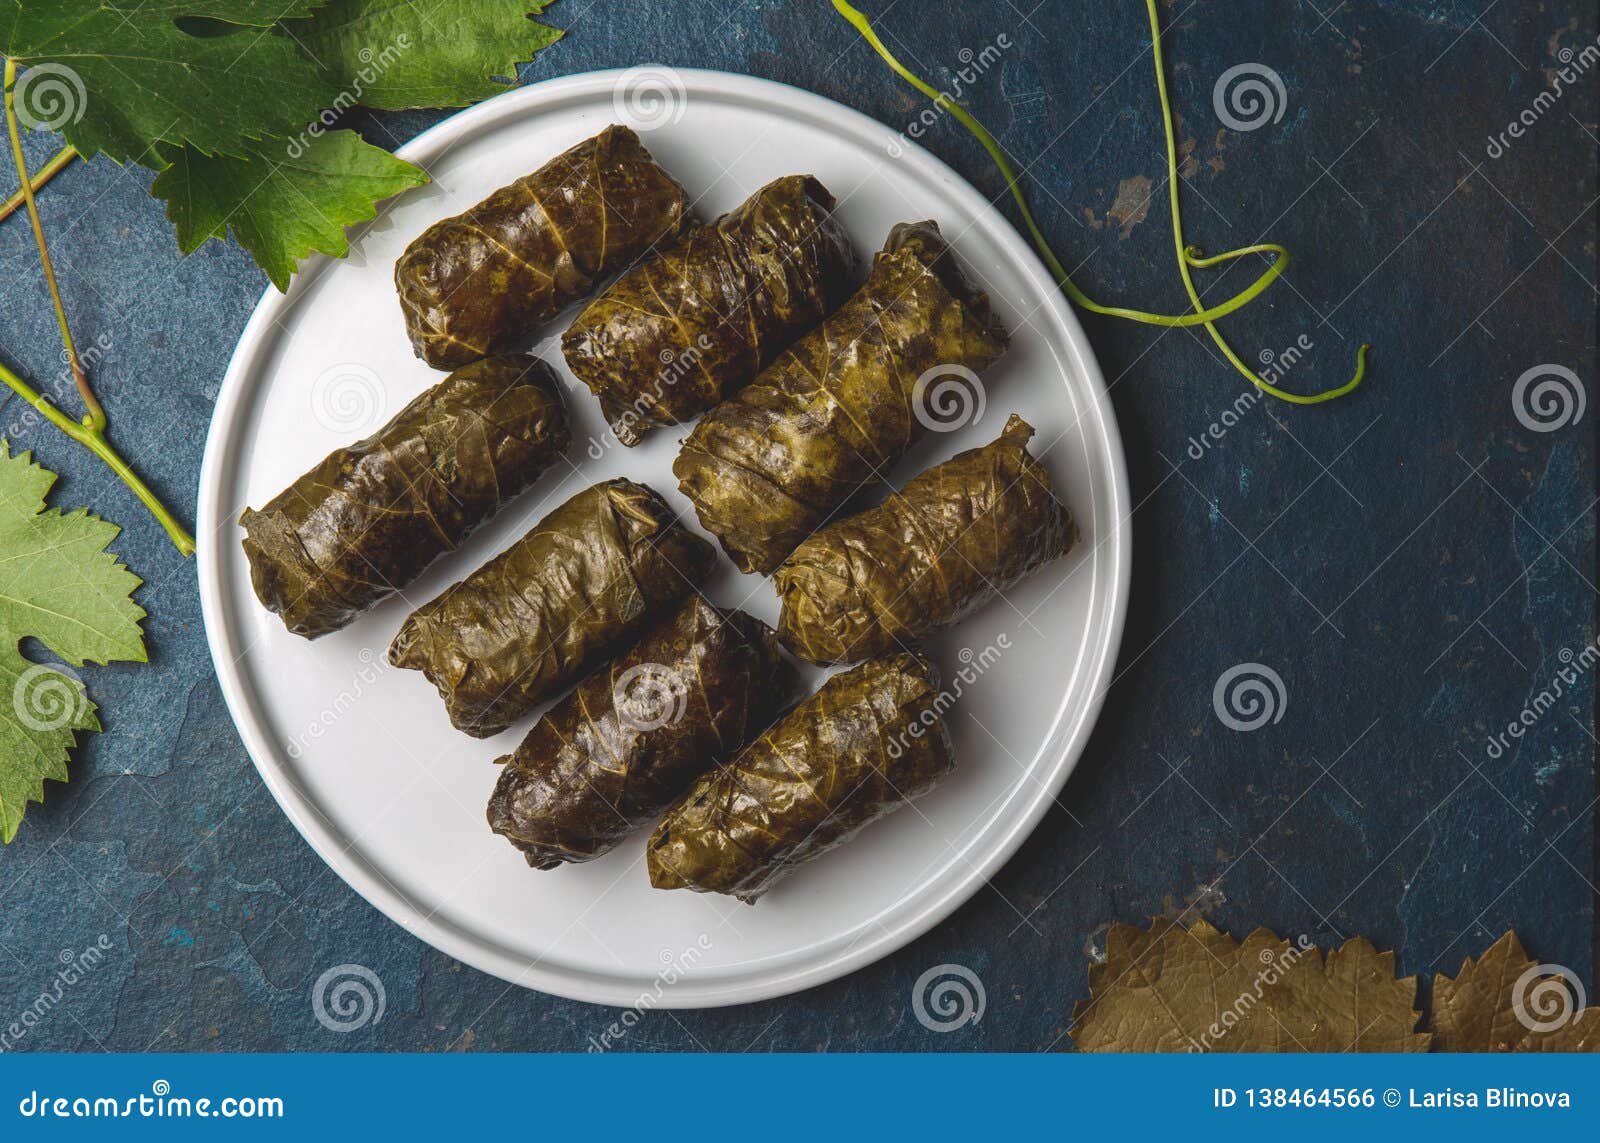 greek dolmadakia. rice and meat wrapped in grape leaves. white plate, blue background